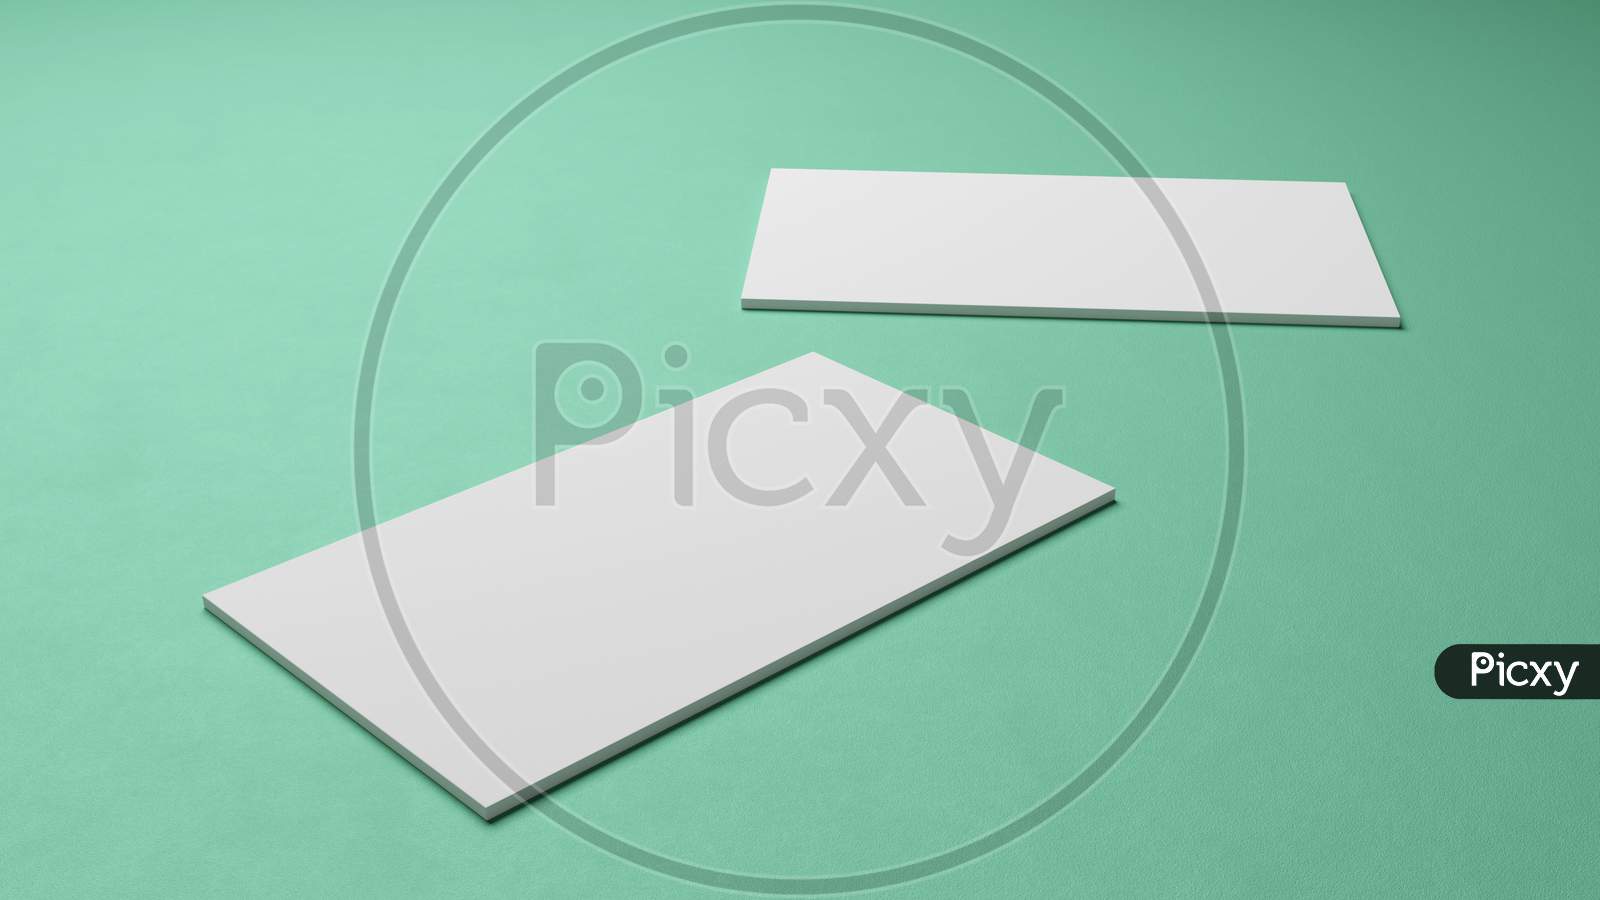 White Square Shape Business Card Mockup Stacking On Green Mint Pastel Color Table Background. Branding Presentation Template Print. 3.5 X 2 Inch Paper Size Cover. 3D Illustration Rendering